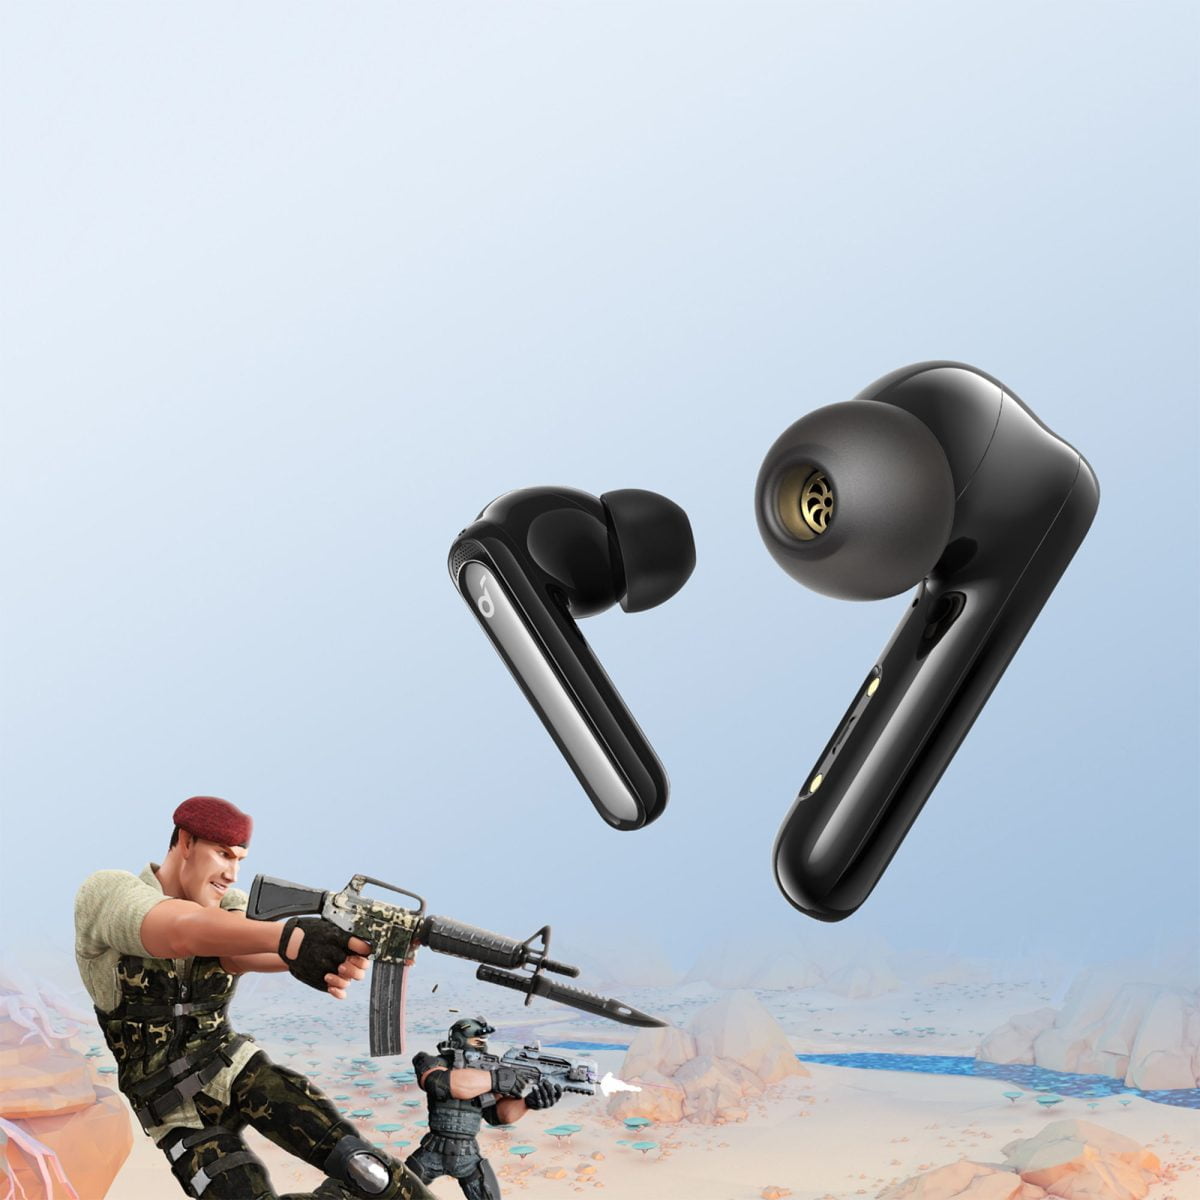 6476205Cv12D Soundcore &Lt;H1 Id=&Quot;Title&Quot; Class=&Quot;A-Size-Large A-Spacing-None&Quot;&Gt;Anker Soundcore Life Note 3 True Wireless Noise Cancelling Earbuds - Black&Lt;/H1&Gt; Enjoy Sound With Clear Treble And Powerful Bass That’s Enhanced In Real-Time By Bassup Technology. 3 Targeted Modes Are Individually Tailored To Cancel Out The Most Distracting Sounds In Each Environment. Voice Pickup Is Free From Background Noises Thanks To Life Note 3’S 6 Microphones That Use Soundcore’s Exclusive Algorithm To Enhance Call Quality. Get 7 Hours From A Single Charge And Up To 35 Hours With The Charging Case. Choose From The Variety Of Included Eartips To Find A Fit That’s Perfect For Your Ears. Life Note 3’S Ergonomic Design Fits In Your Ear Comfortably And Remains Stable Even When Listening On The Move. Enhances And Emphasizes The Sound Of Footsteps, Gunfire, And More For A More Immersive Playing Experience. &Lt;Pre&Gt;Anker Product Warranty&Lt;/Pre&Gt; &Lt;Pre&Gt;&Lt;B&Gt;We Also Provide International Wholesale And Retail Shipping To All Gcc Countries: Saudi Arabia, Qatar, Oman, Kuwait, Bahrain.&Lt;/B&Gt;&Lt;/Pre&Gt; Earbuds Anker Soundcore Life Note 3 Earbuds - Black A3933H11